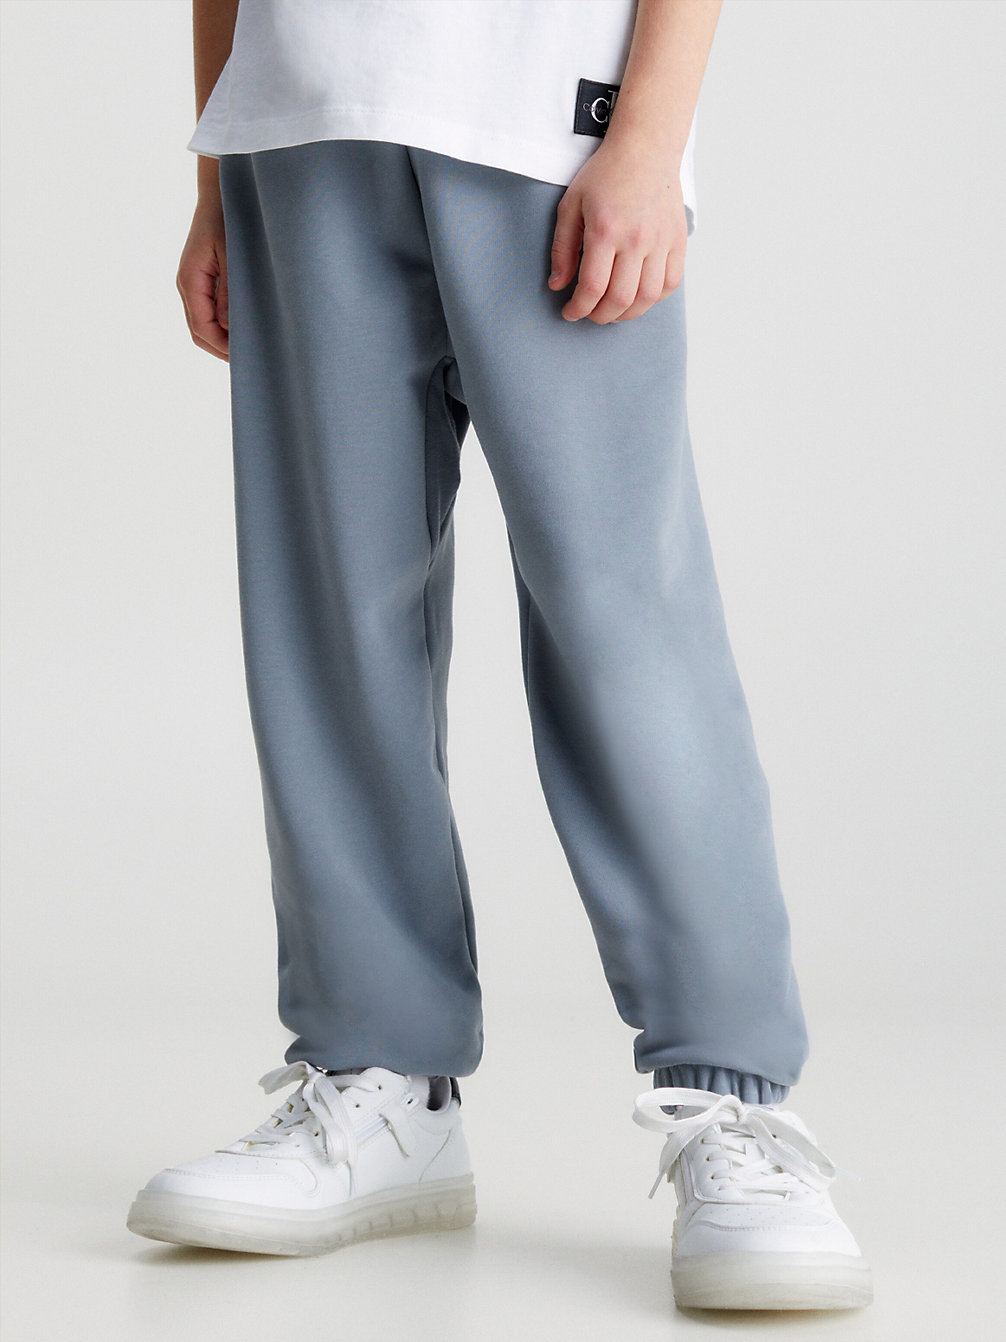 OVERCAST GREY Blended Stretch Terry Joggers undefined boys Calvin Klein